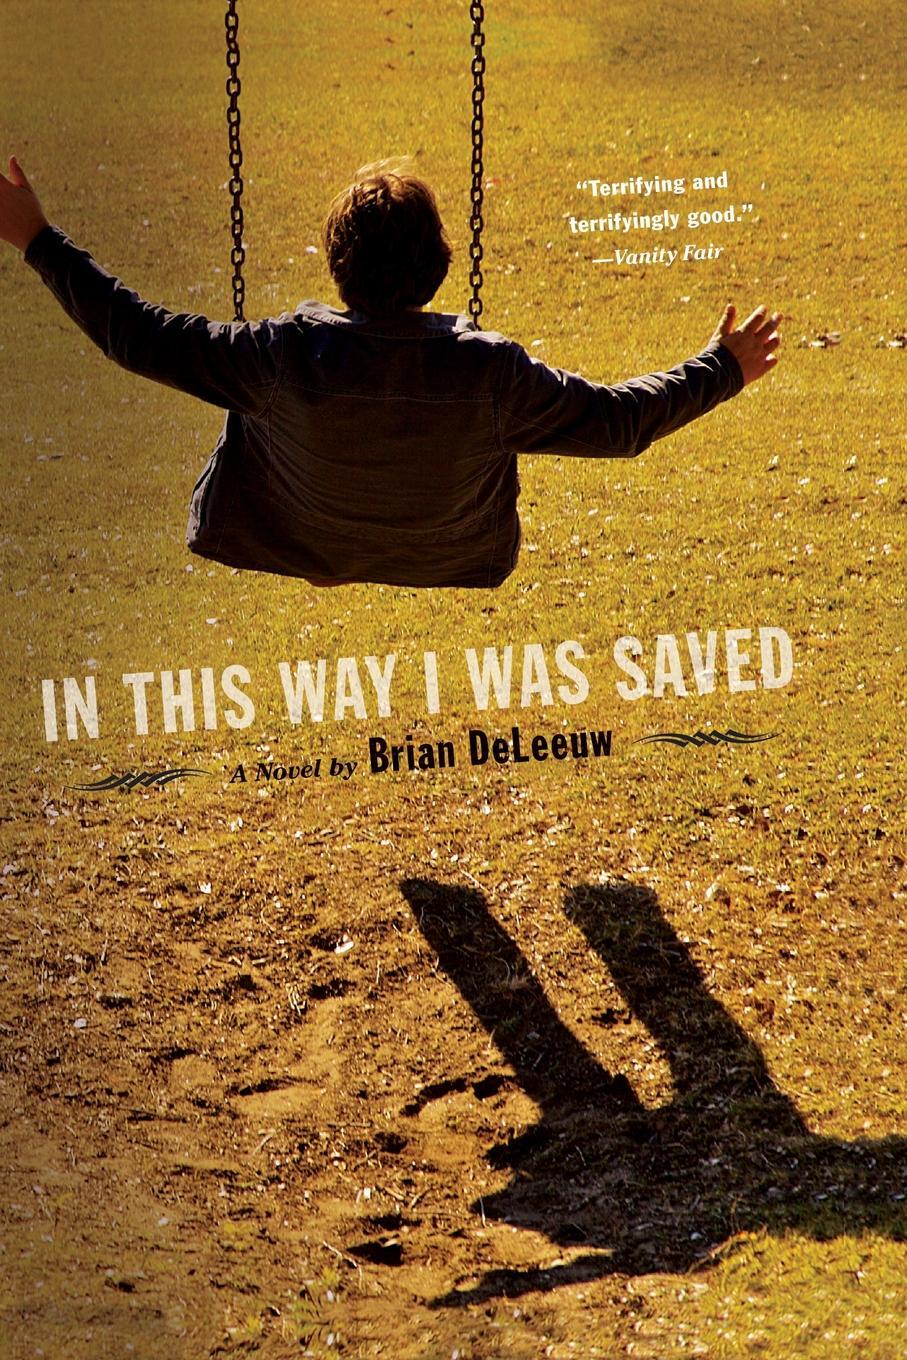 I was saving. I was saved. Follow this way Kerry. This way i was saved by Deleeuw. I was be saved.